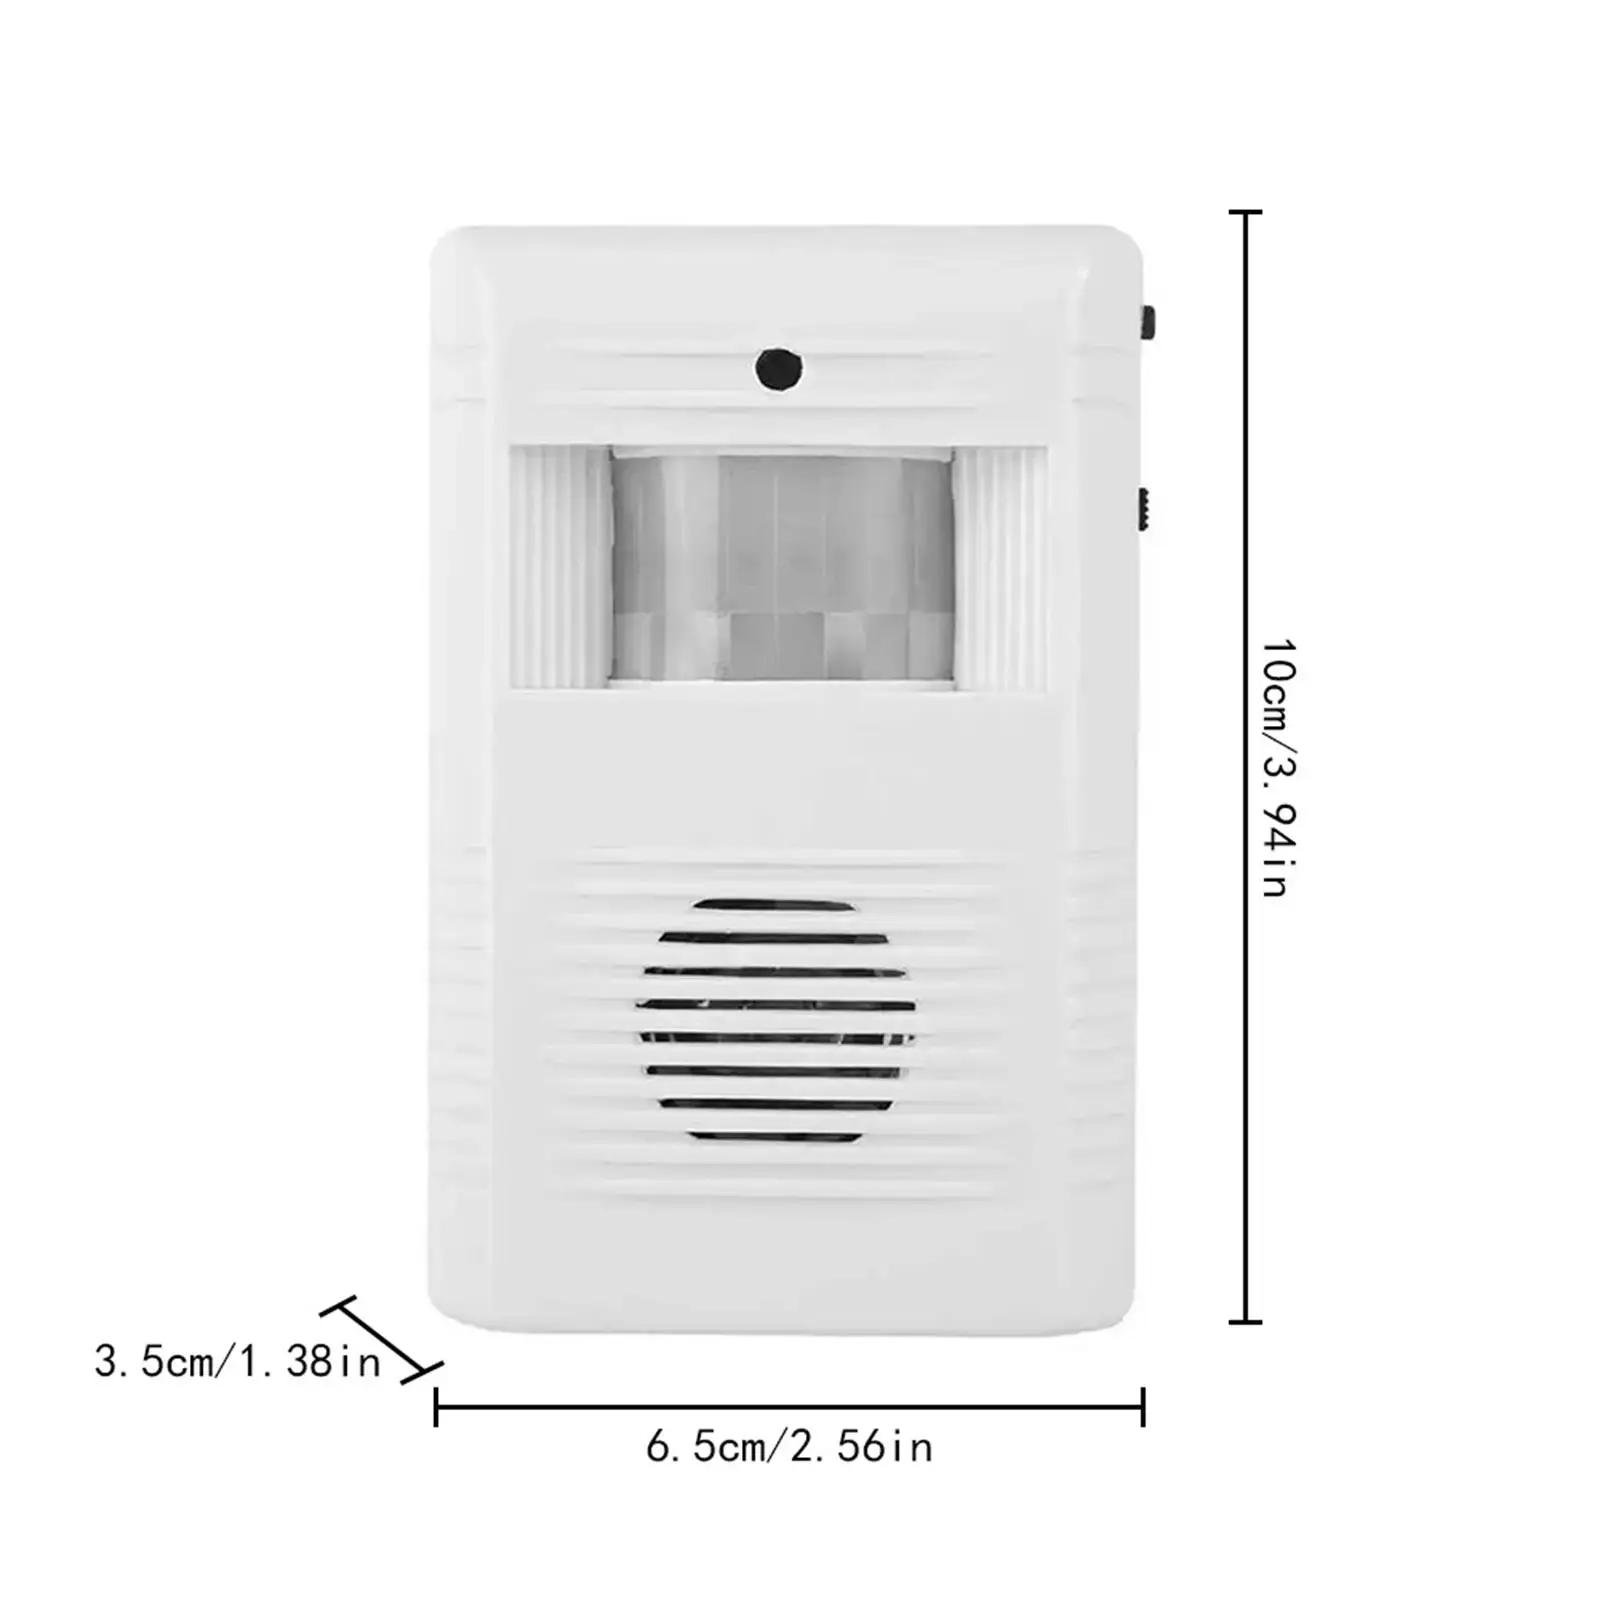 Infrared Motion Sensor Welcome Doorbell Welcome Device for Business Entrance